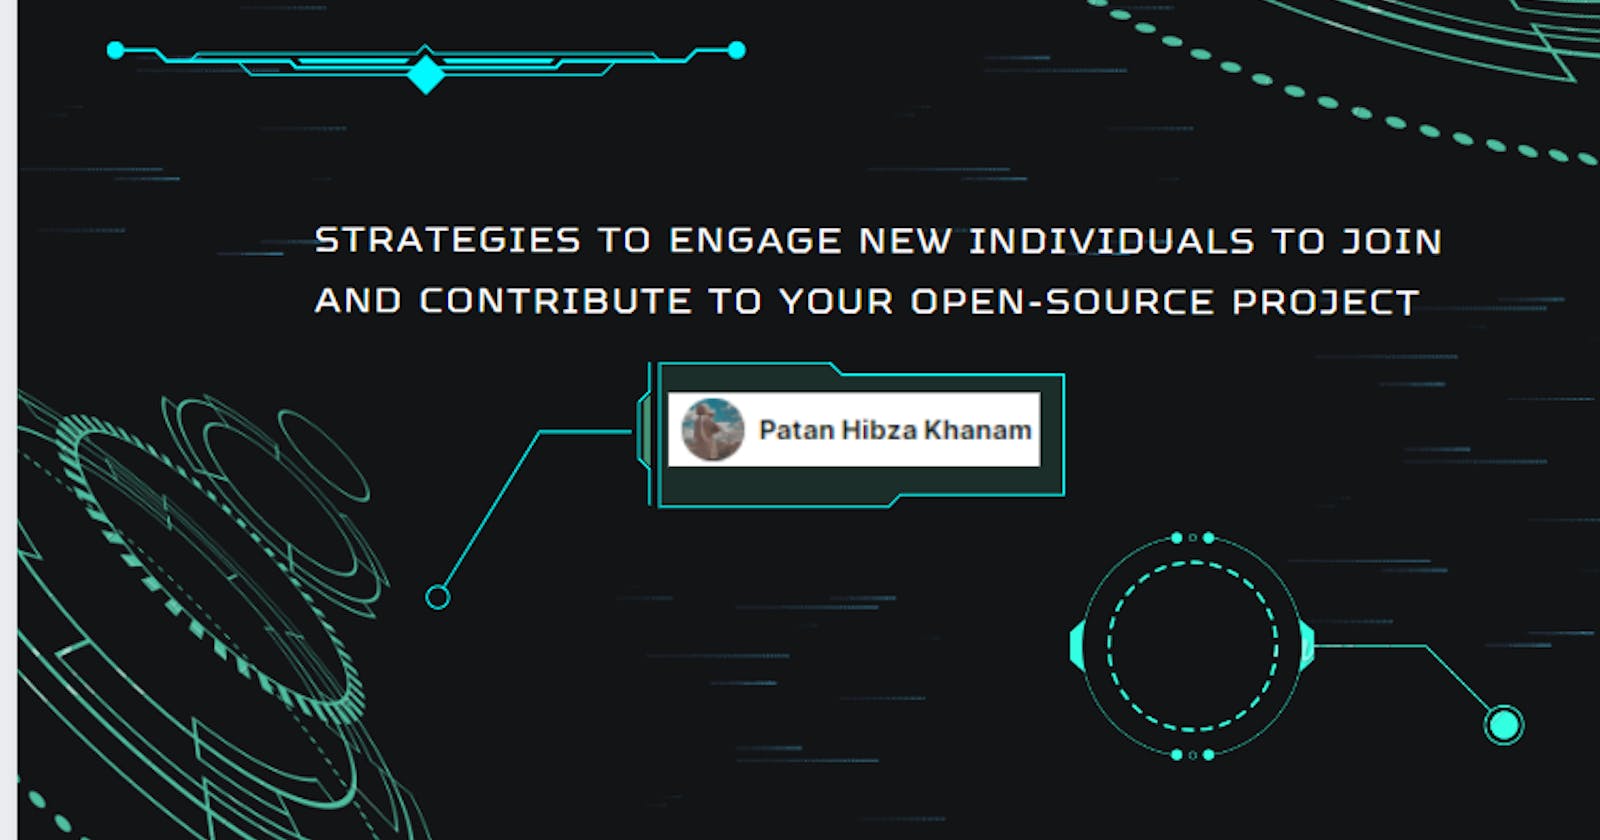 Strategies to engage new individuals to join and contribute to your open-source project